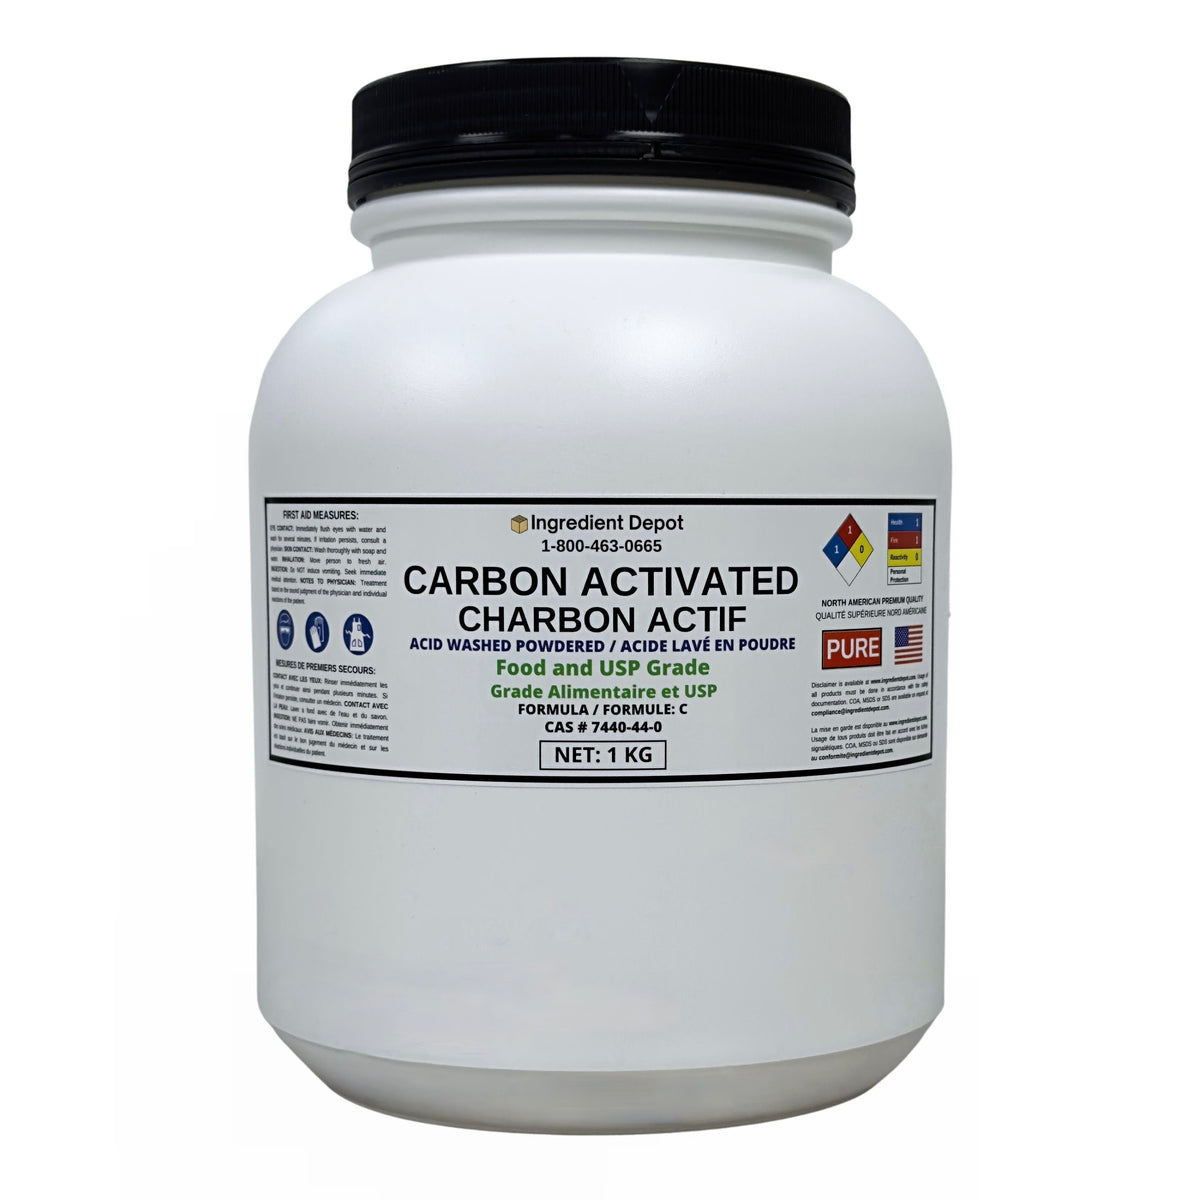 Carbon Activated Acid Washed Powdered 1 kg